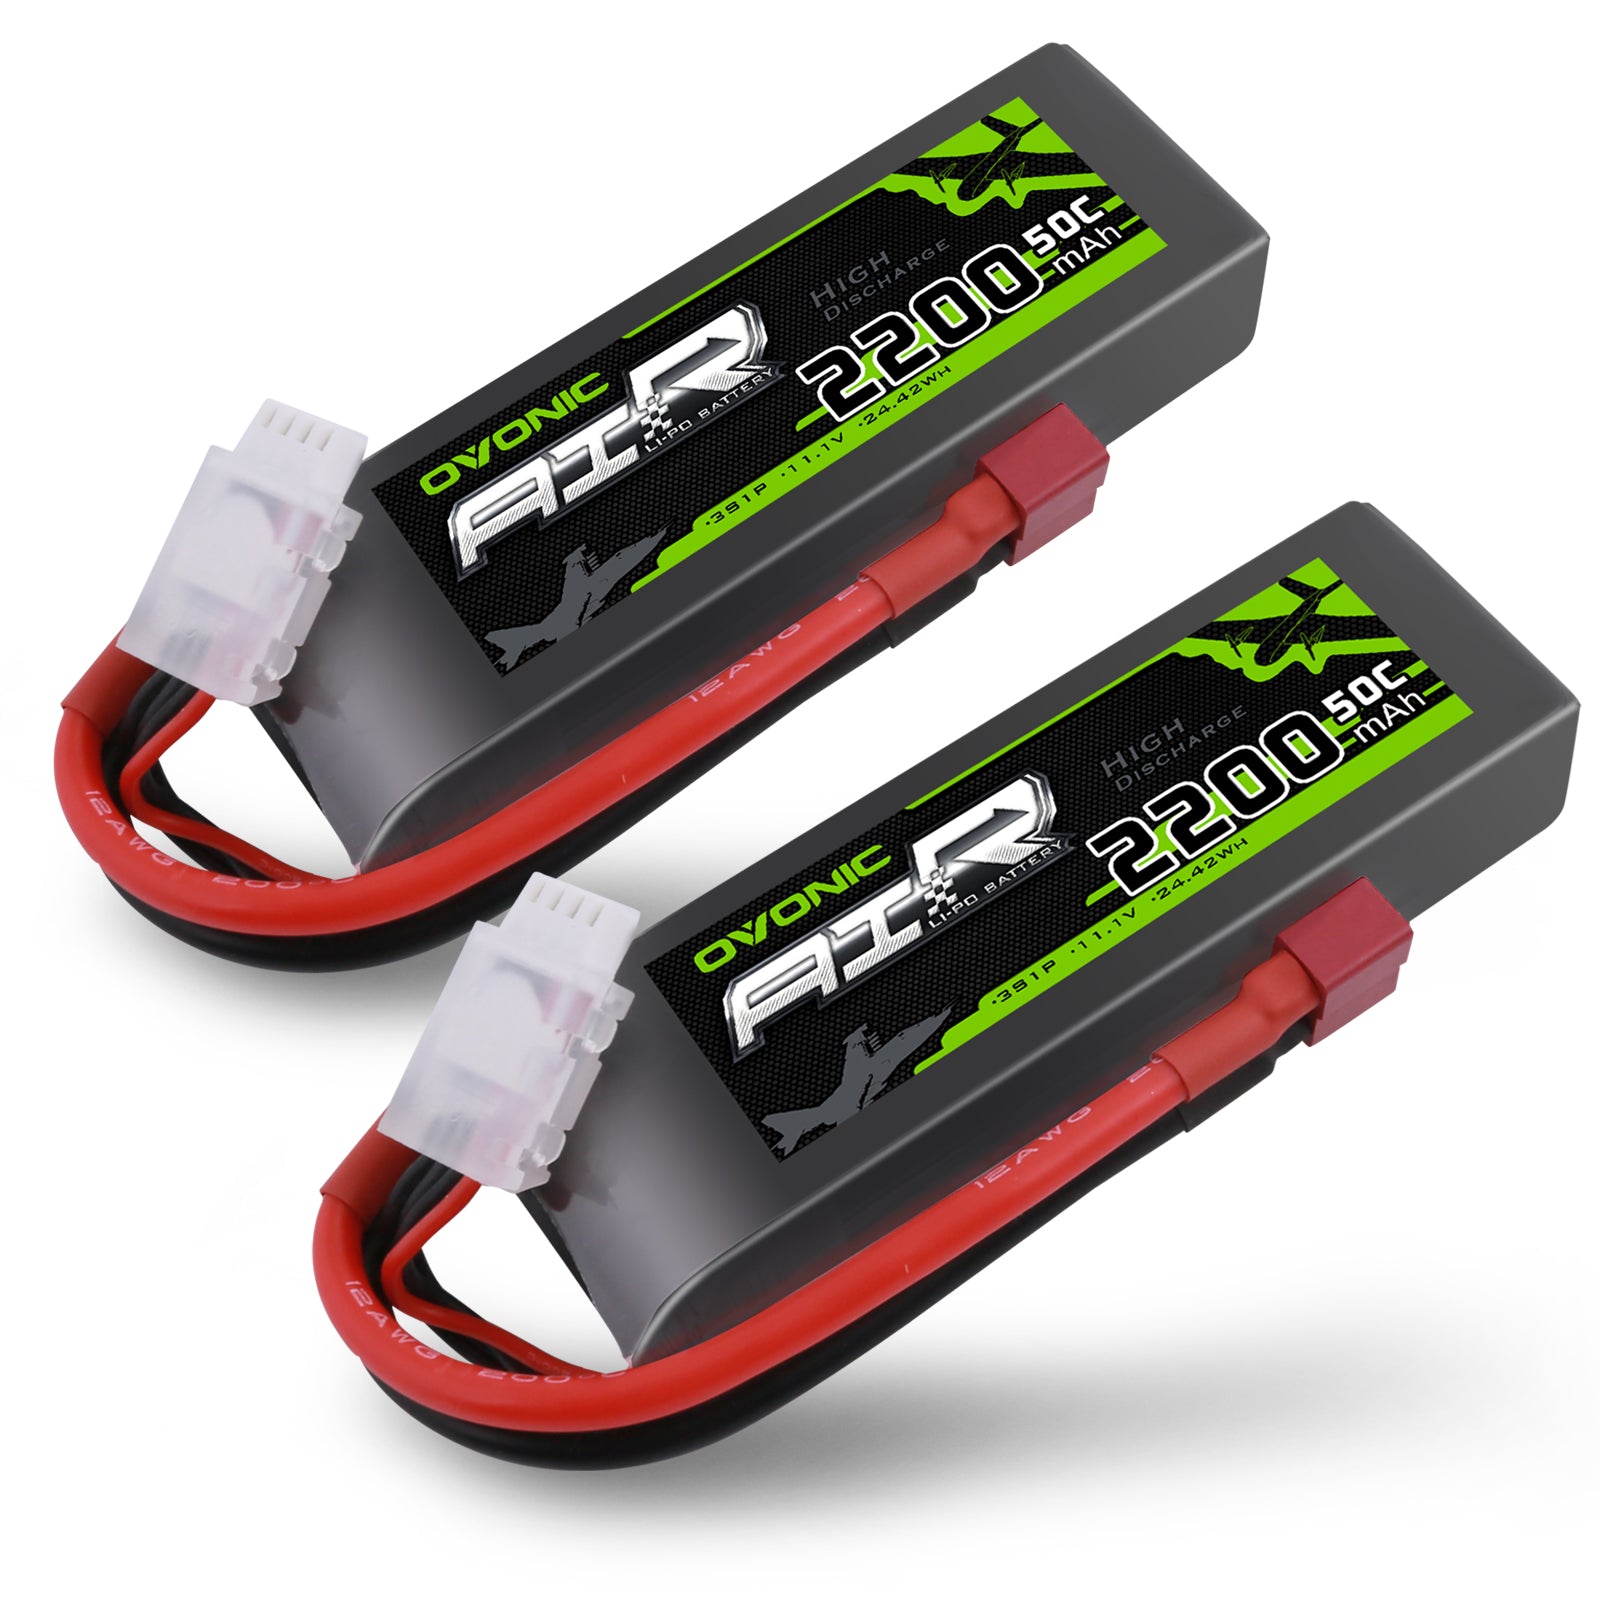 2×Ovonic 50C 3S 11.1V 2200mAh LiPo Battery Pack with Deans Plug - US Warehouse